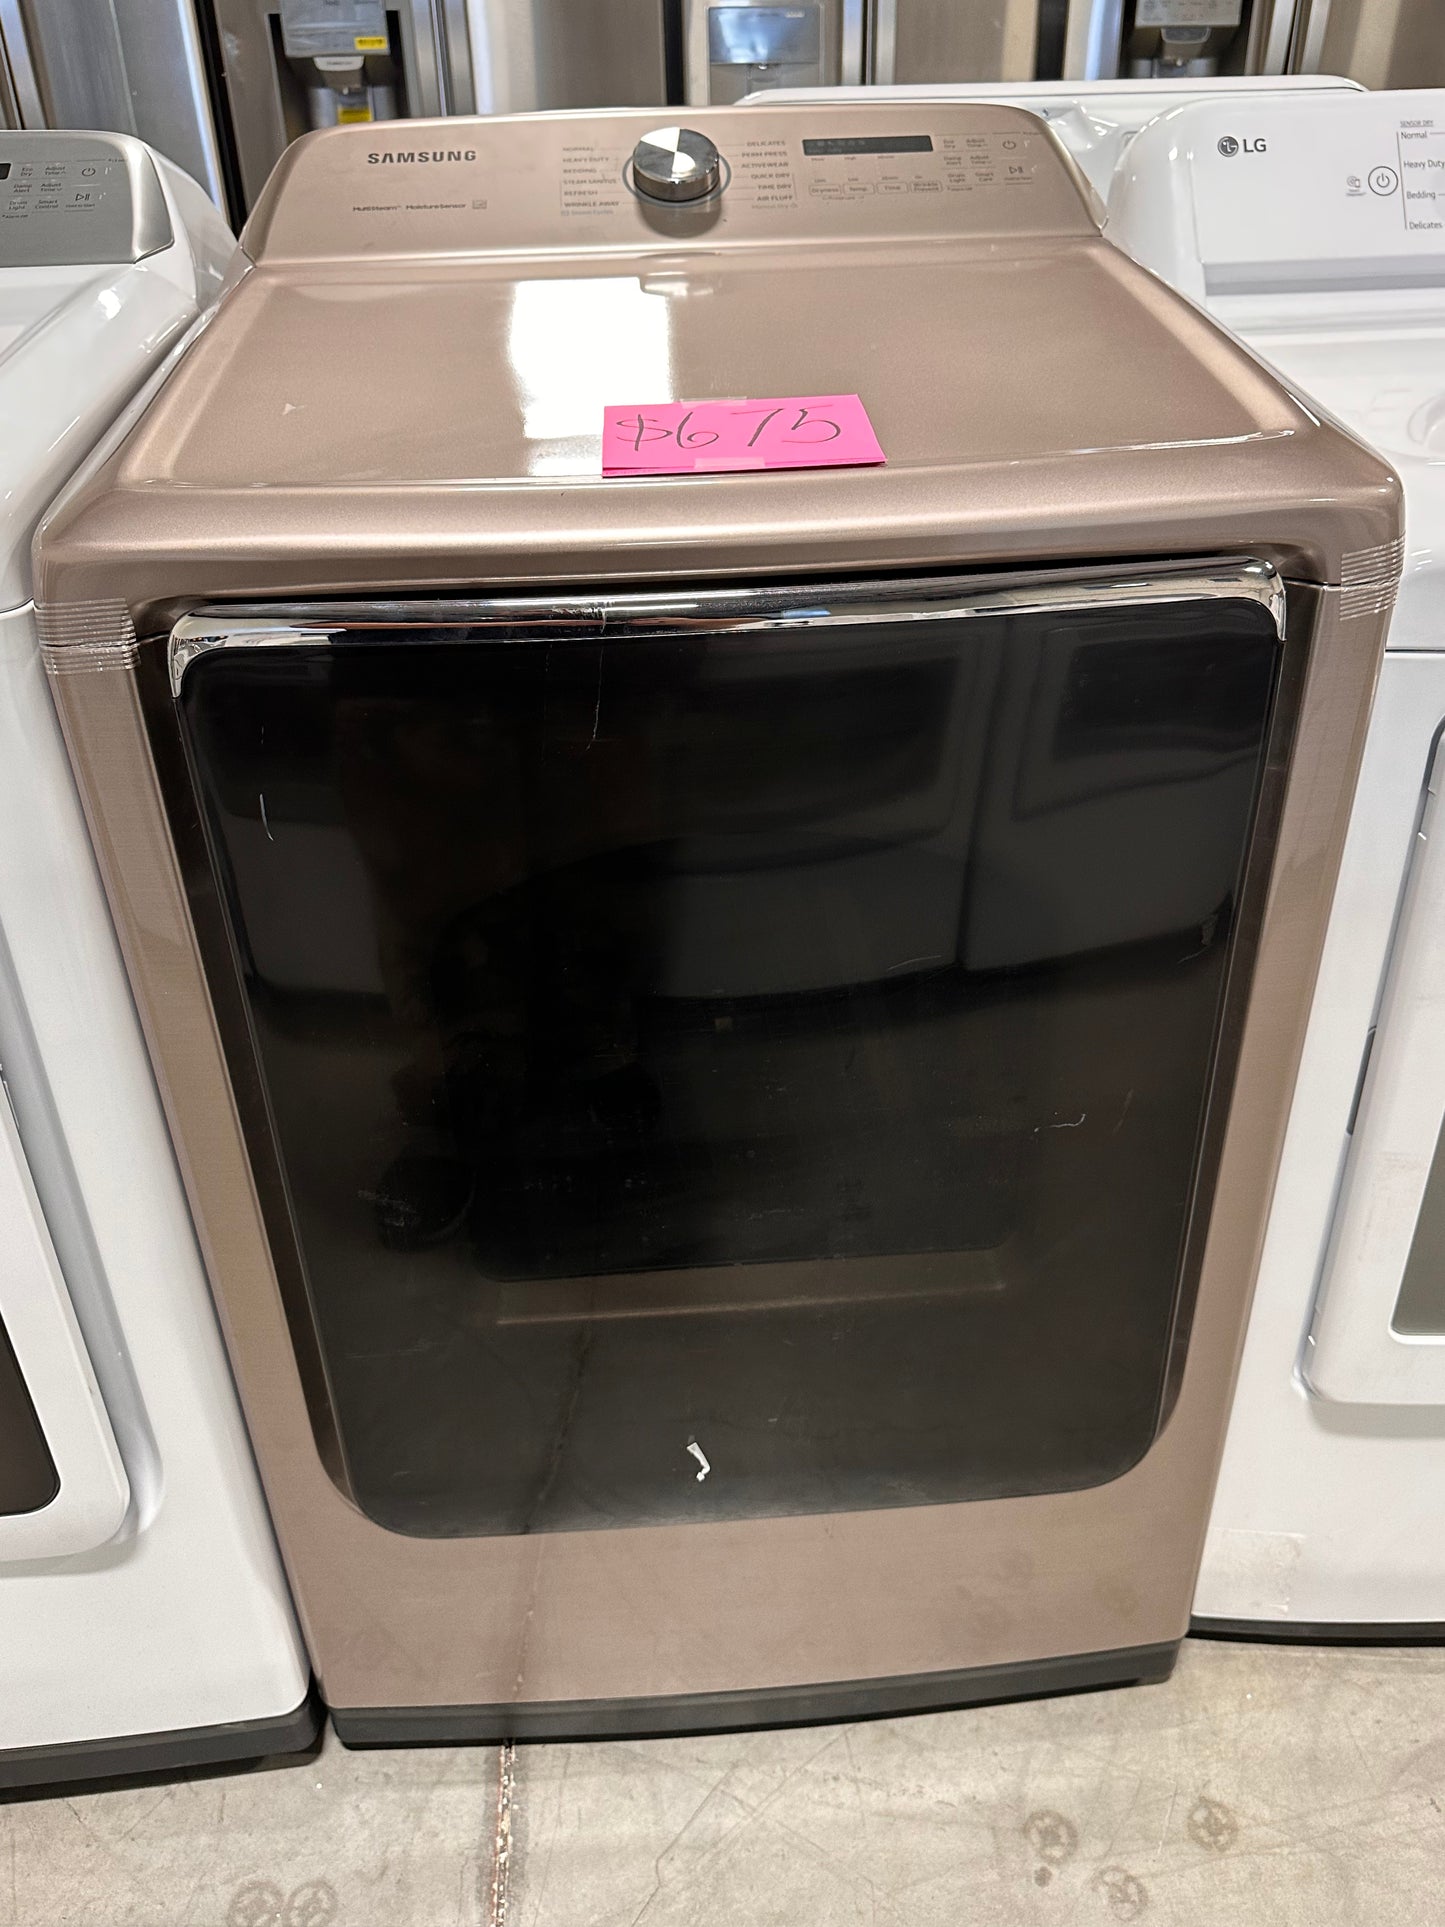 BEAUTIFUL NEW SAMSUNG ELECTRIC DRYER - DRY11820